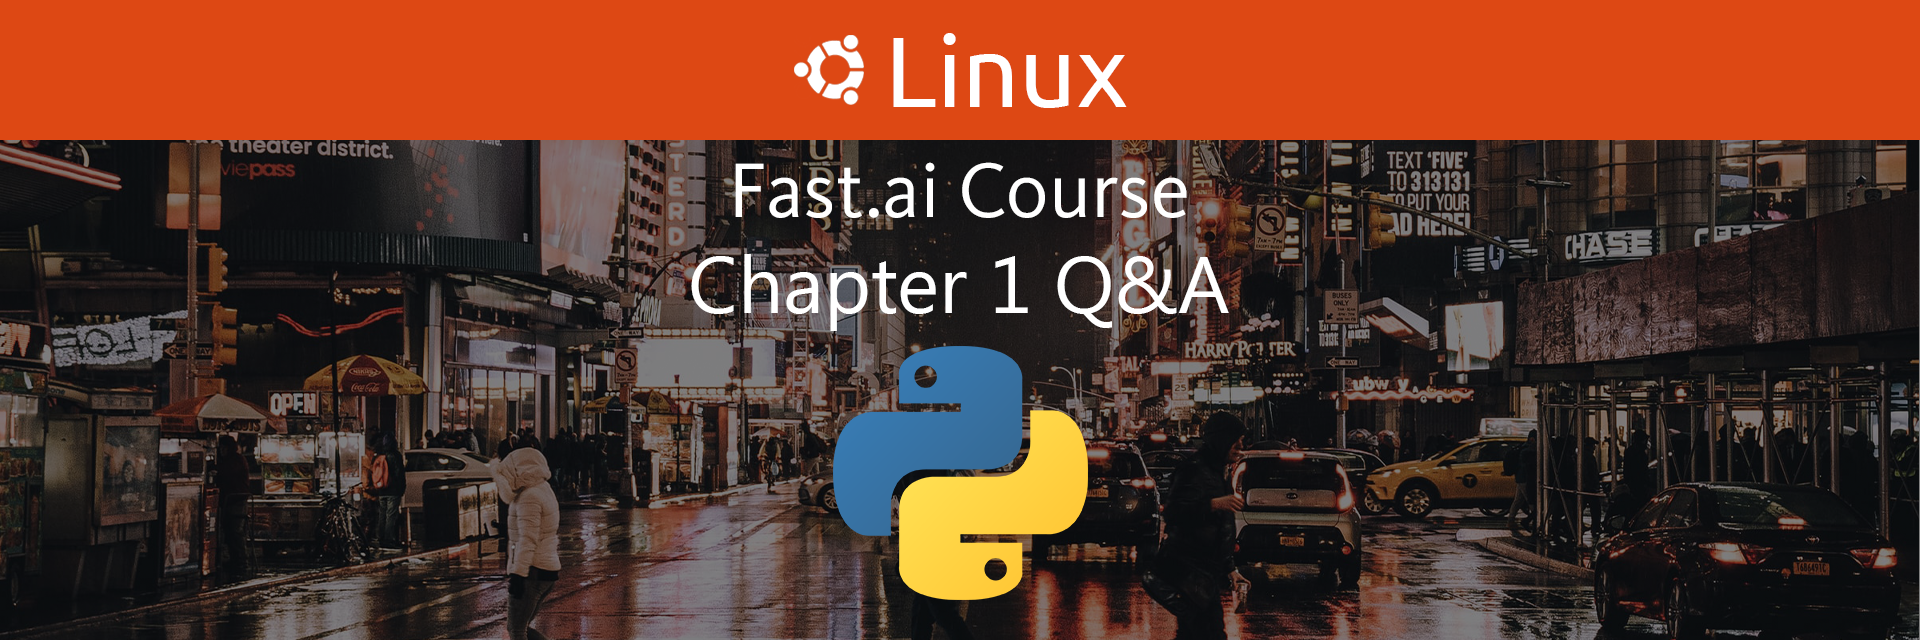 Fast.ai Course Chapter 1 Q&A on Linux